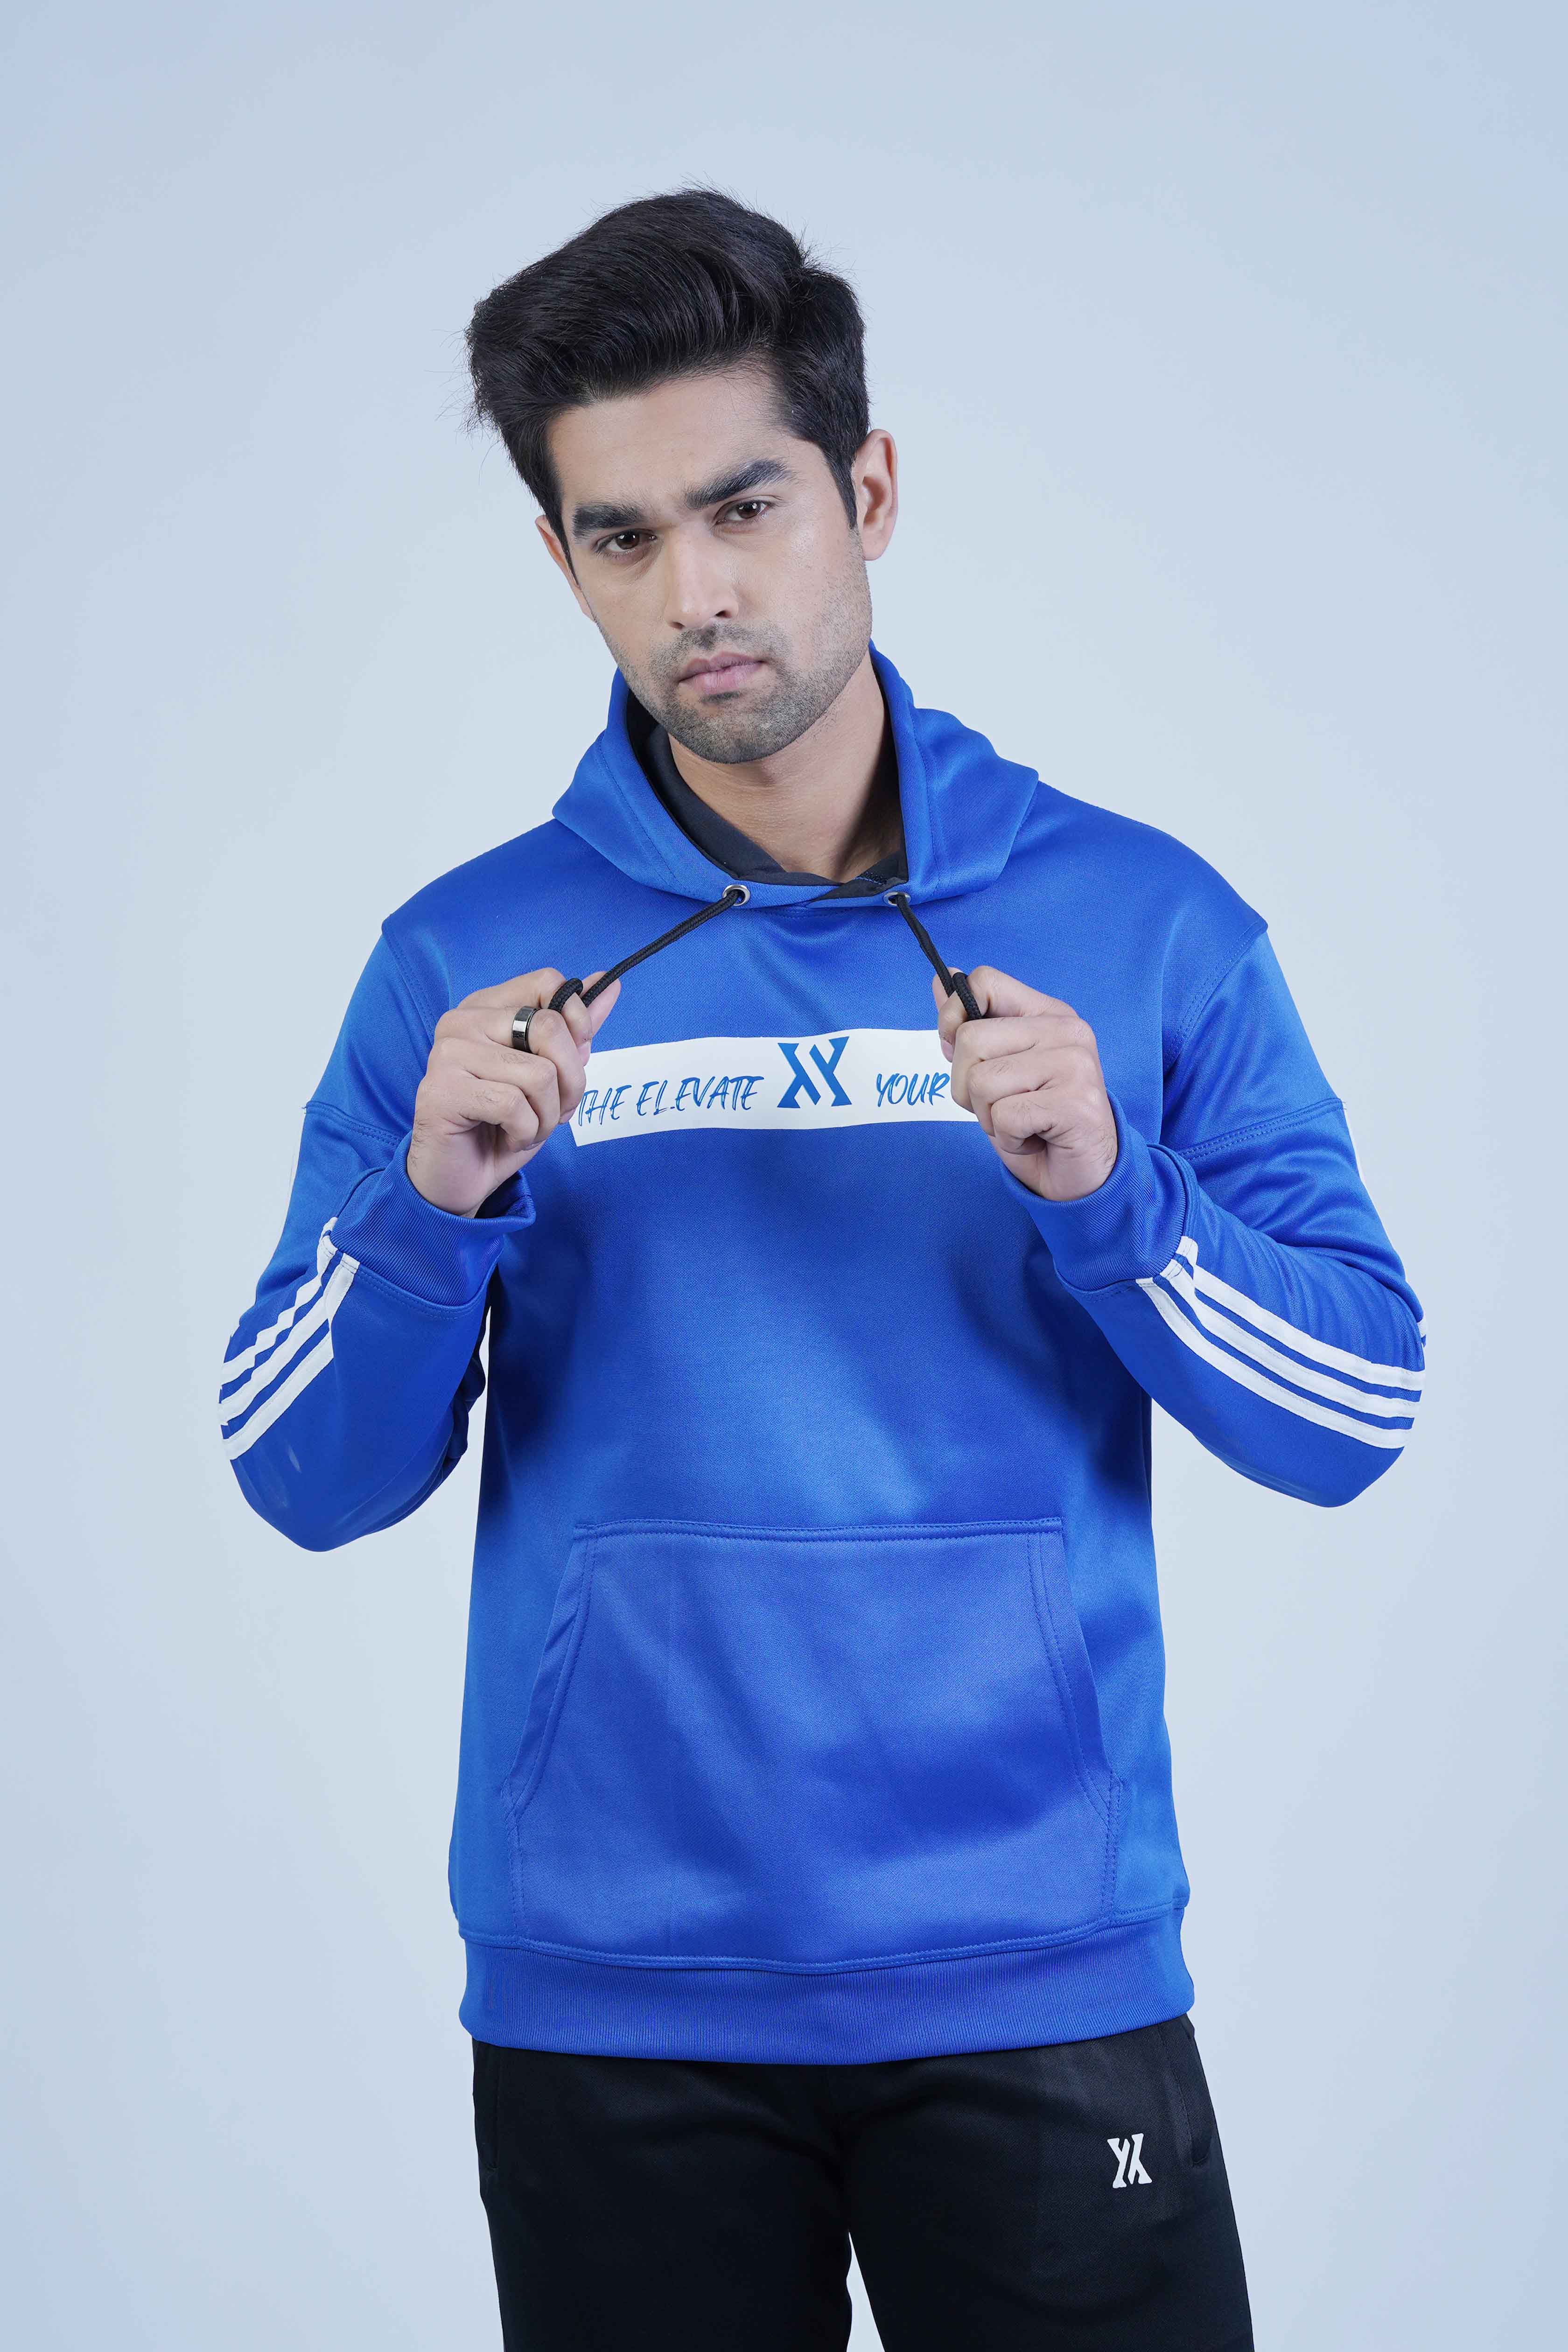 Casual and Trendy: The Xea Urban 2.0 Royal Blue Hoodie for Men